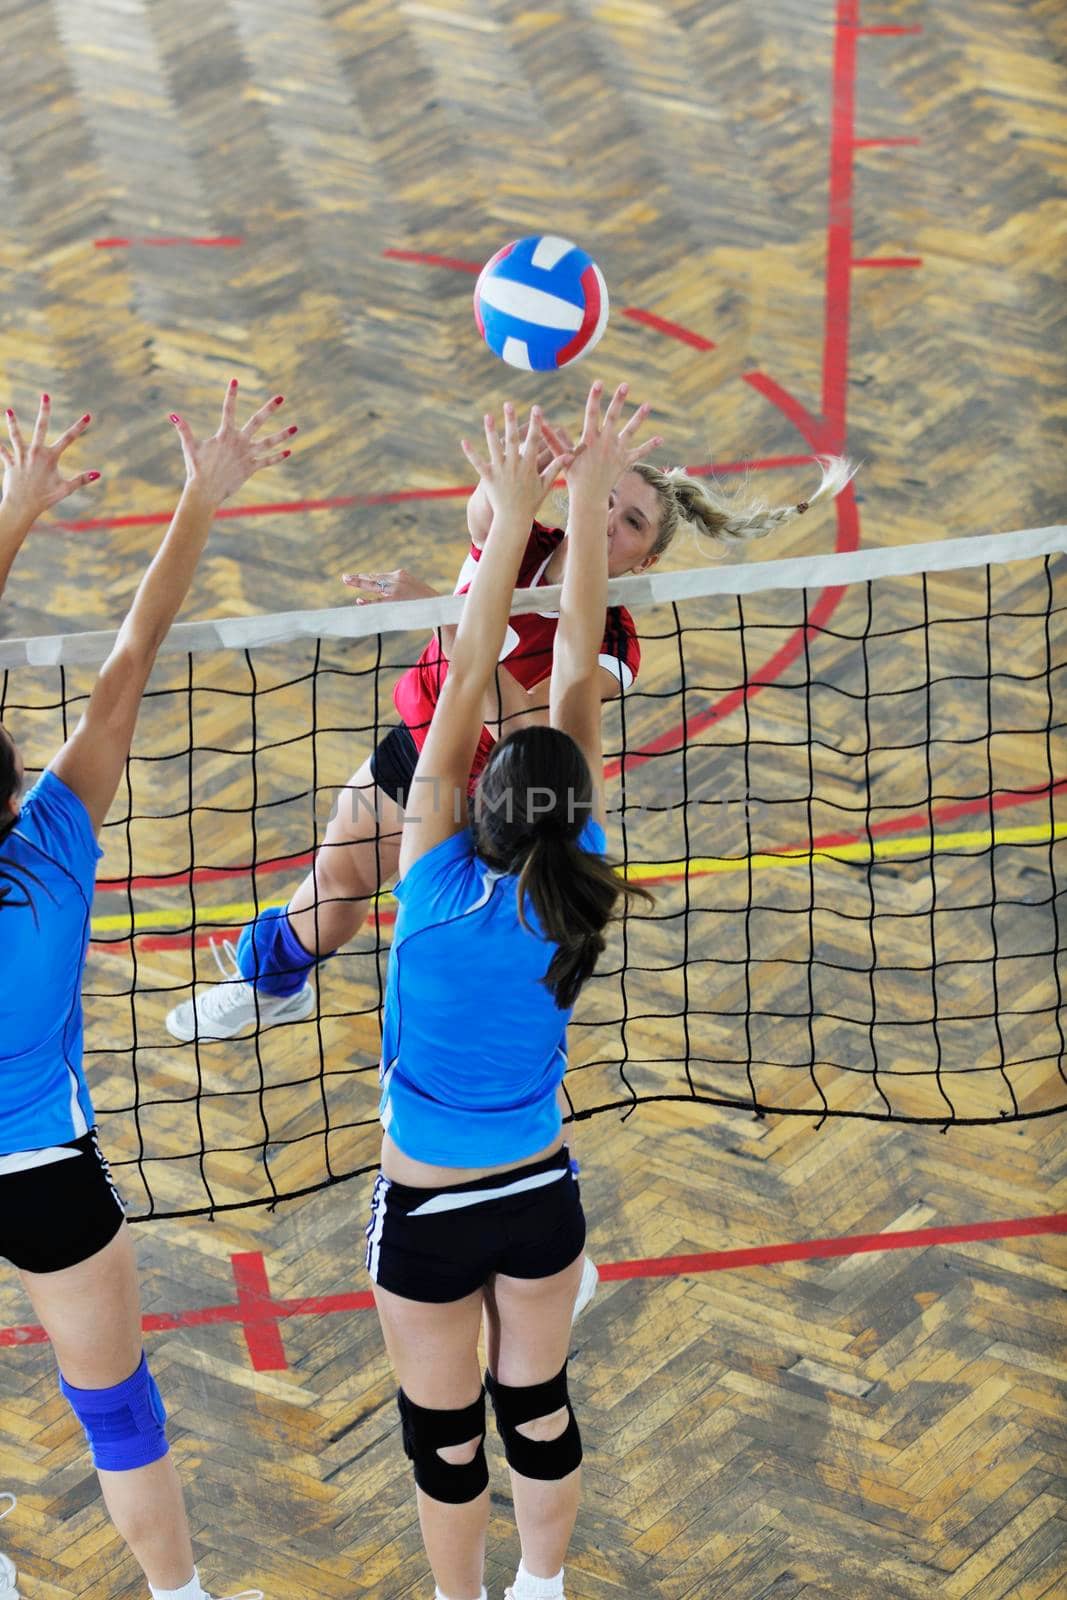 volleyball game sport with group of young beautiful  girls indoor in sport arena